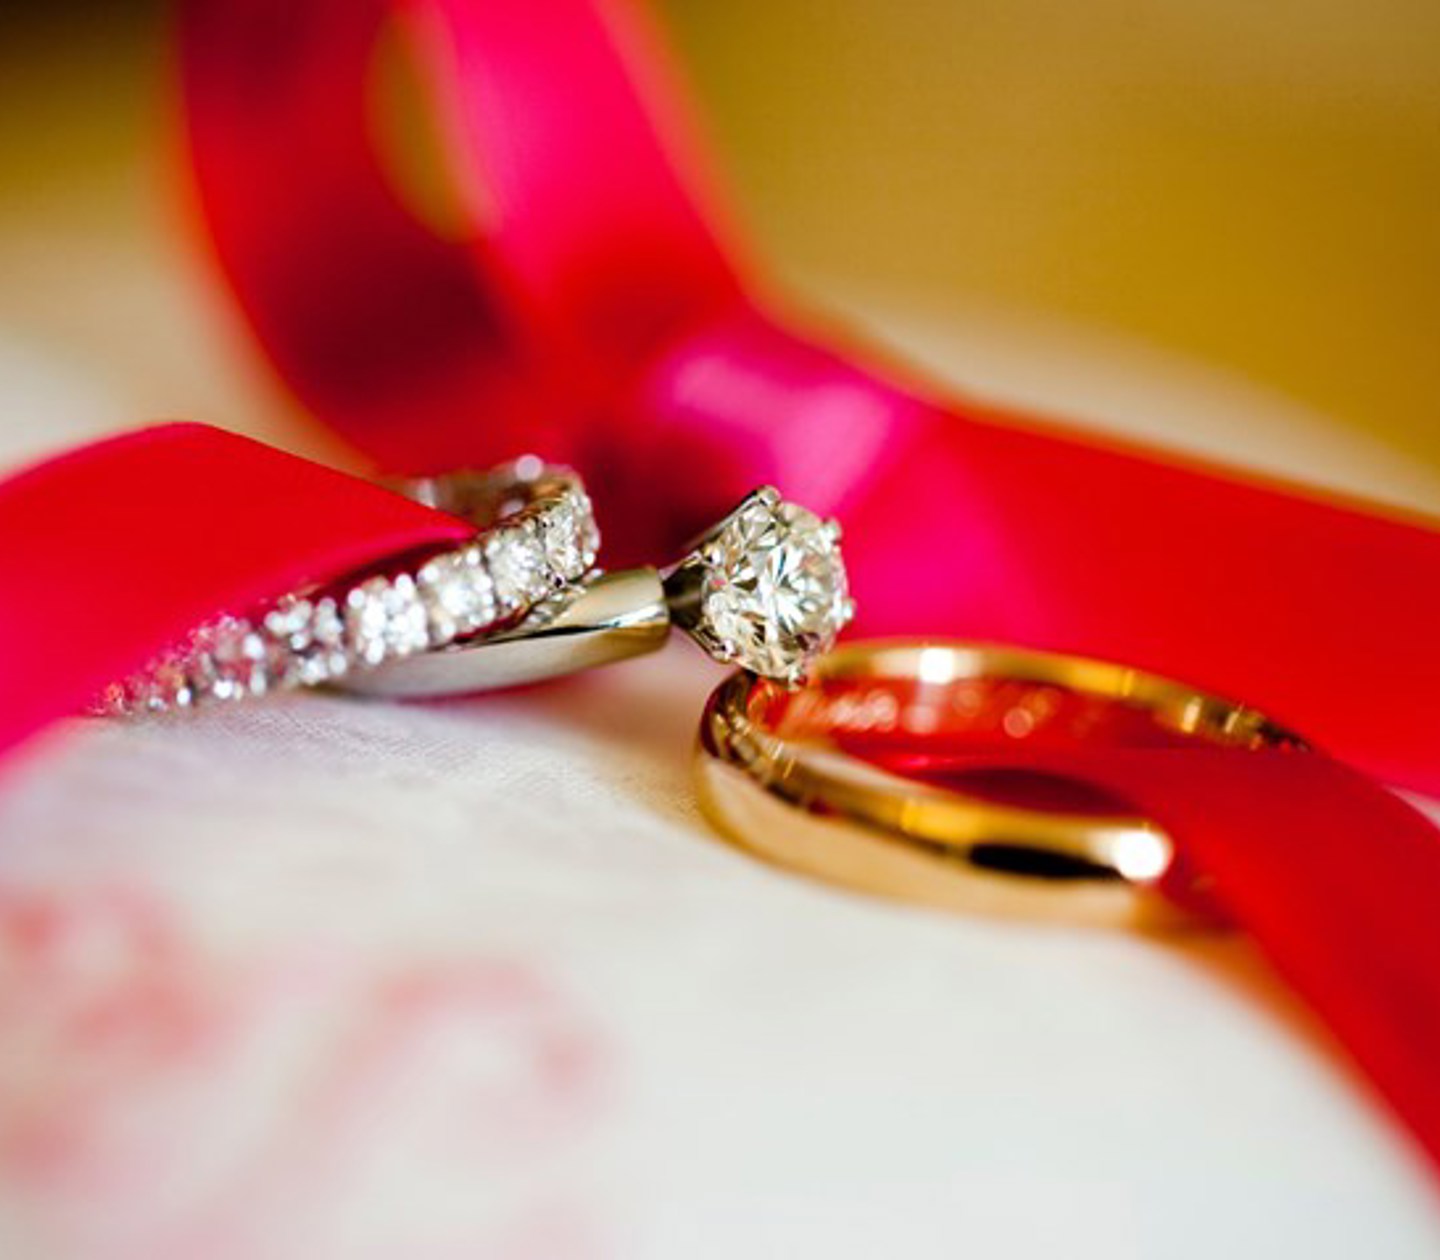 Wedding rings wrapped with a red ribbon